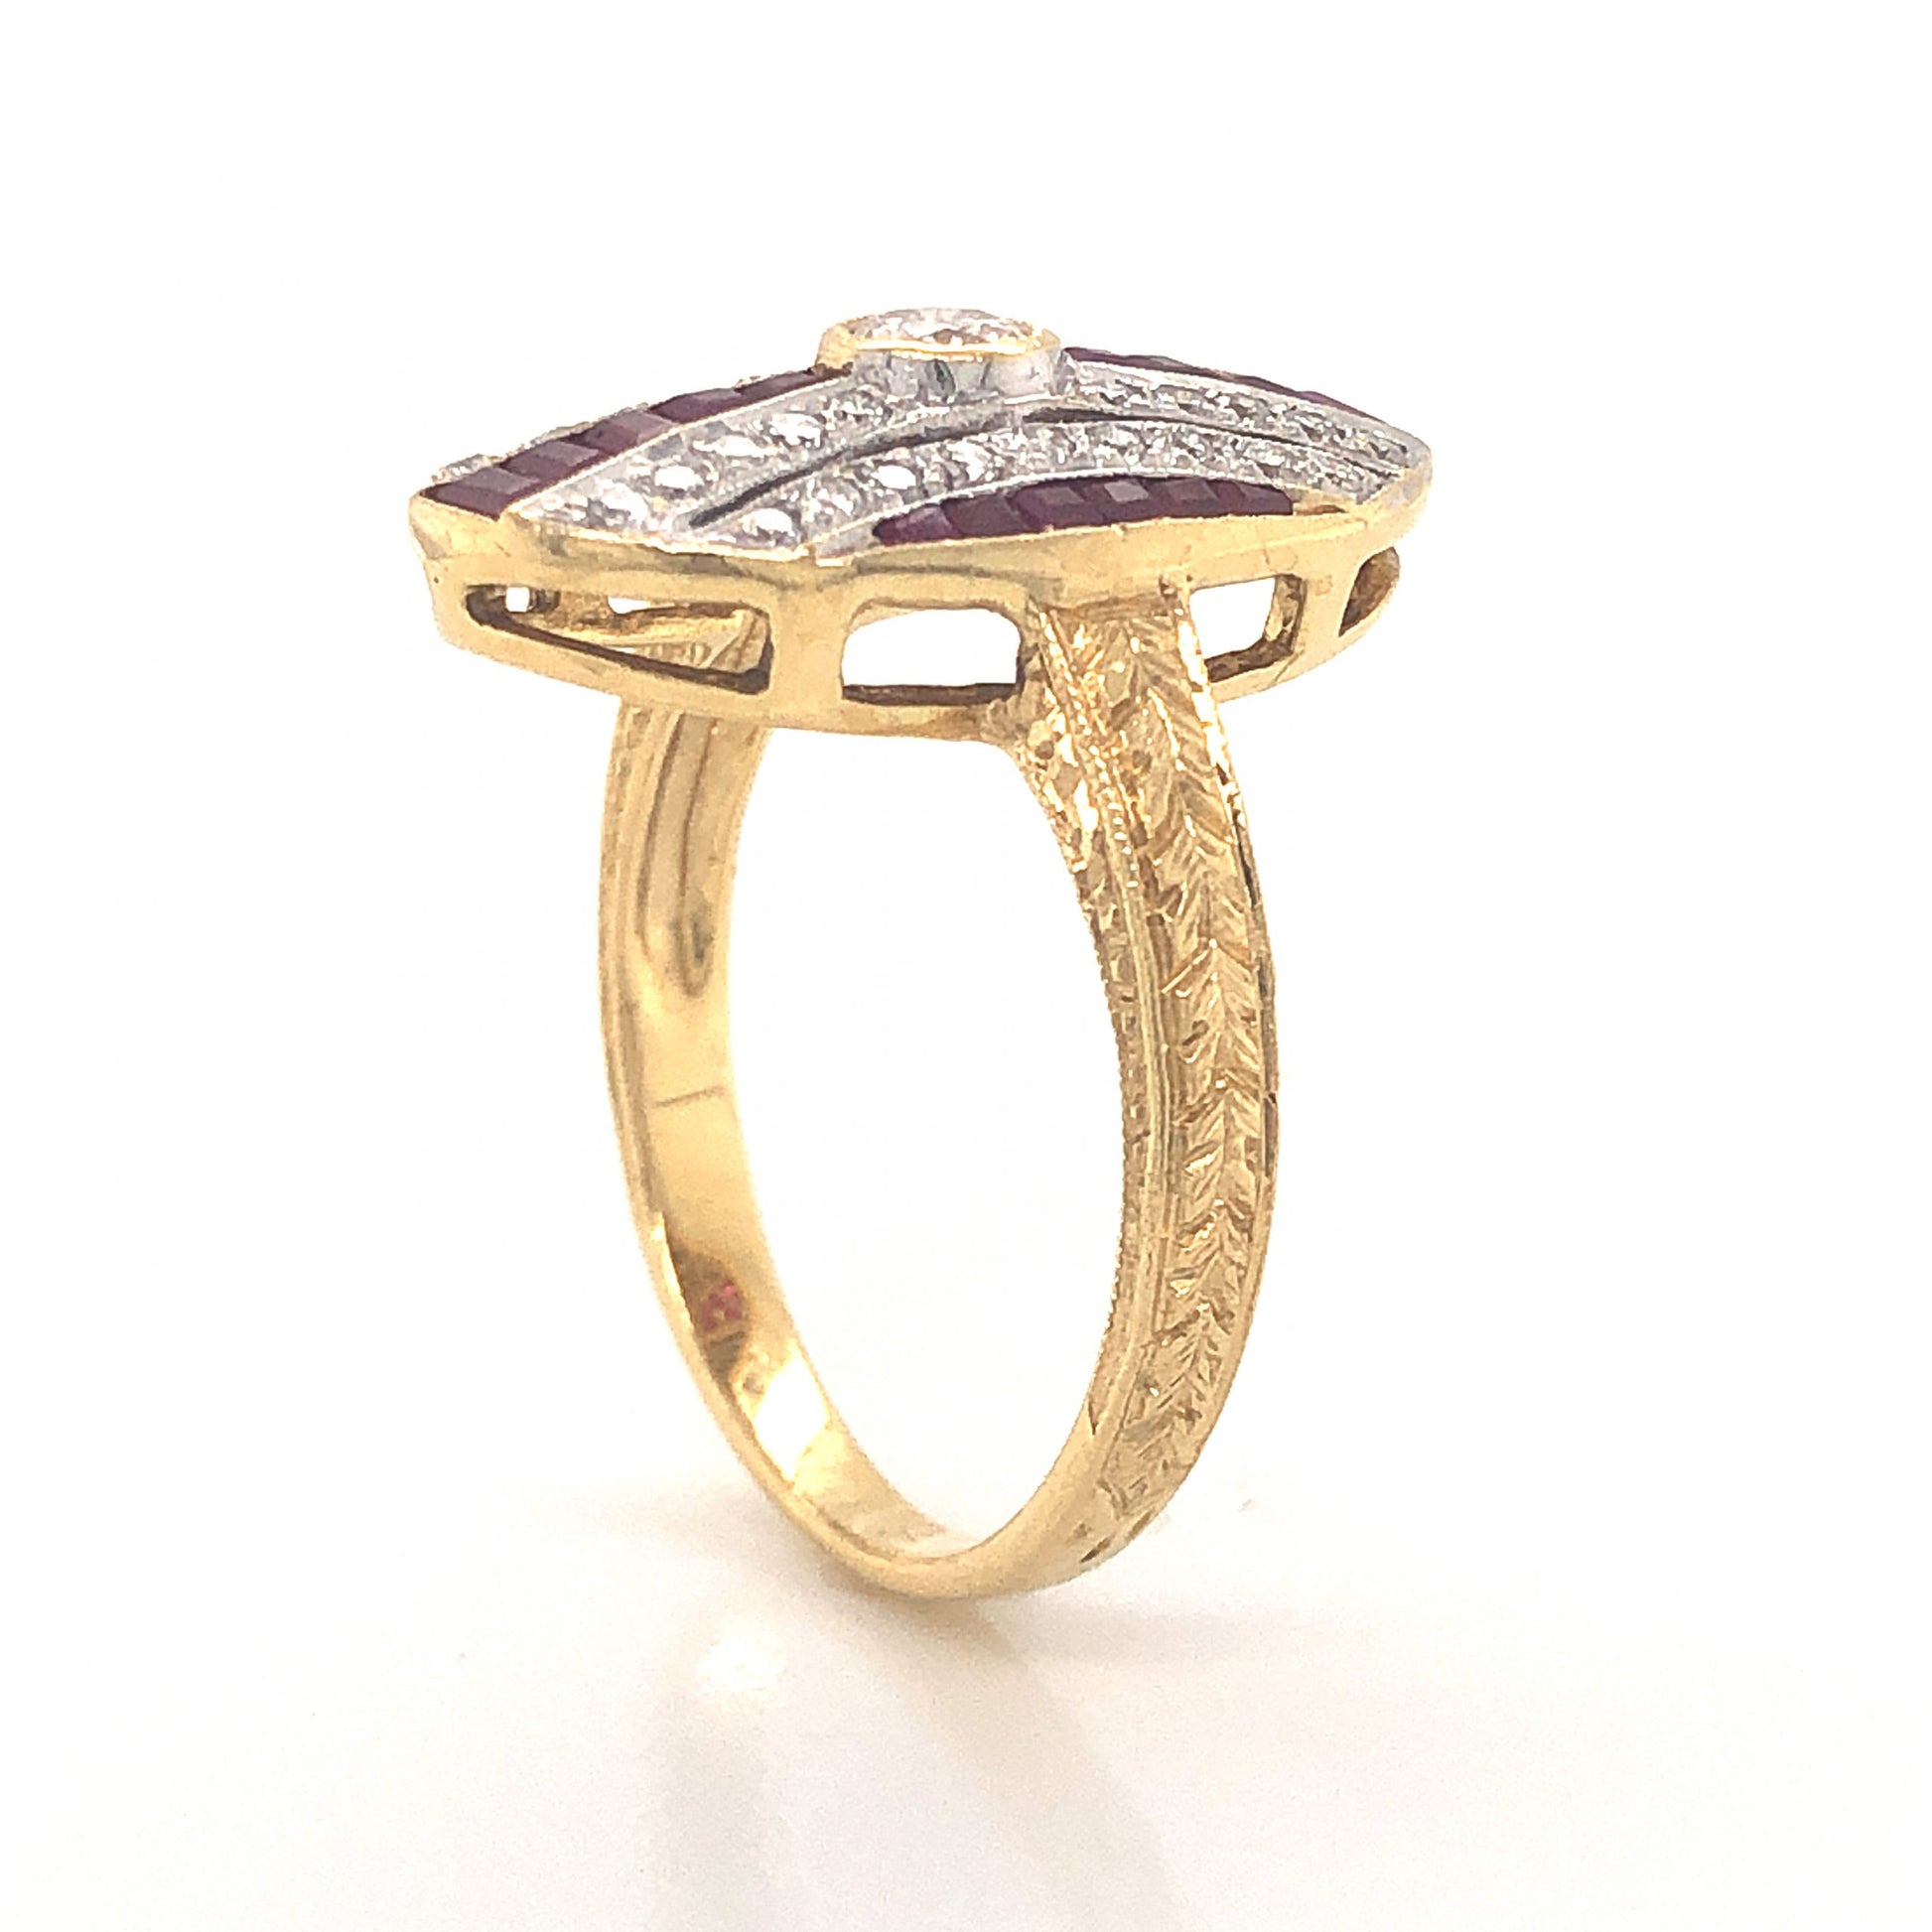 Retro Diamond & Ruby Cocktail Ring in 18k Yellow & White GoldComposition: PlatinumRing Size: 6.75Total Diamond Weight: .59 ctTotal Gram Weight: 5.1 gInscription: 750